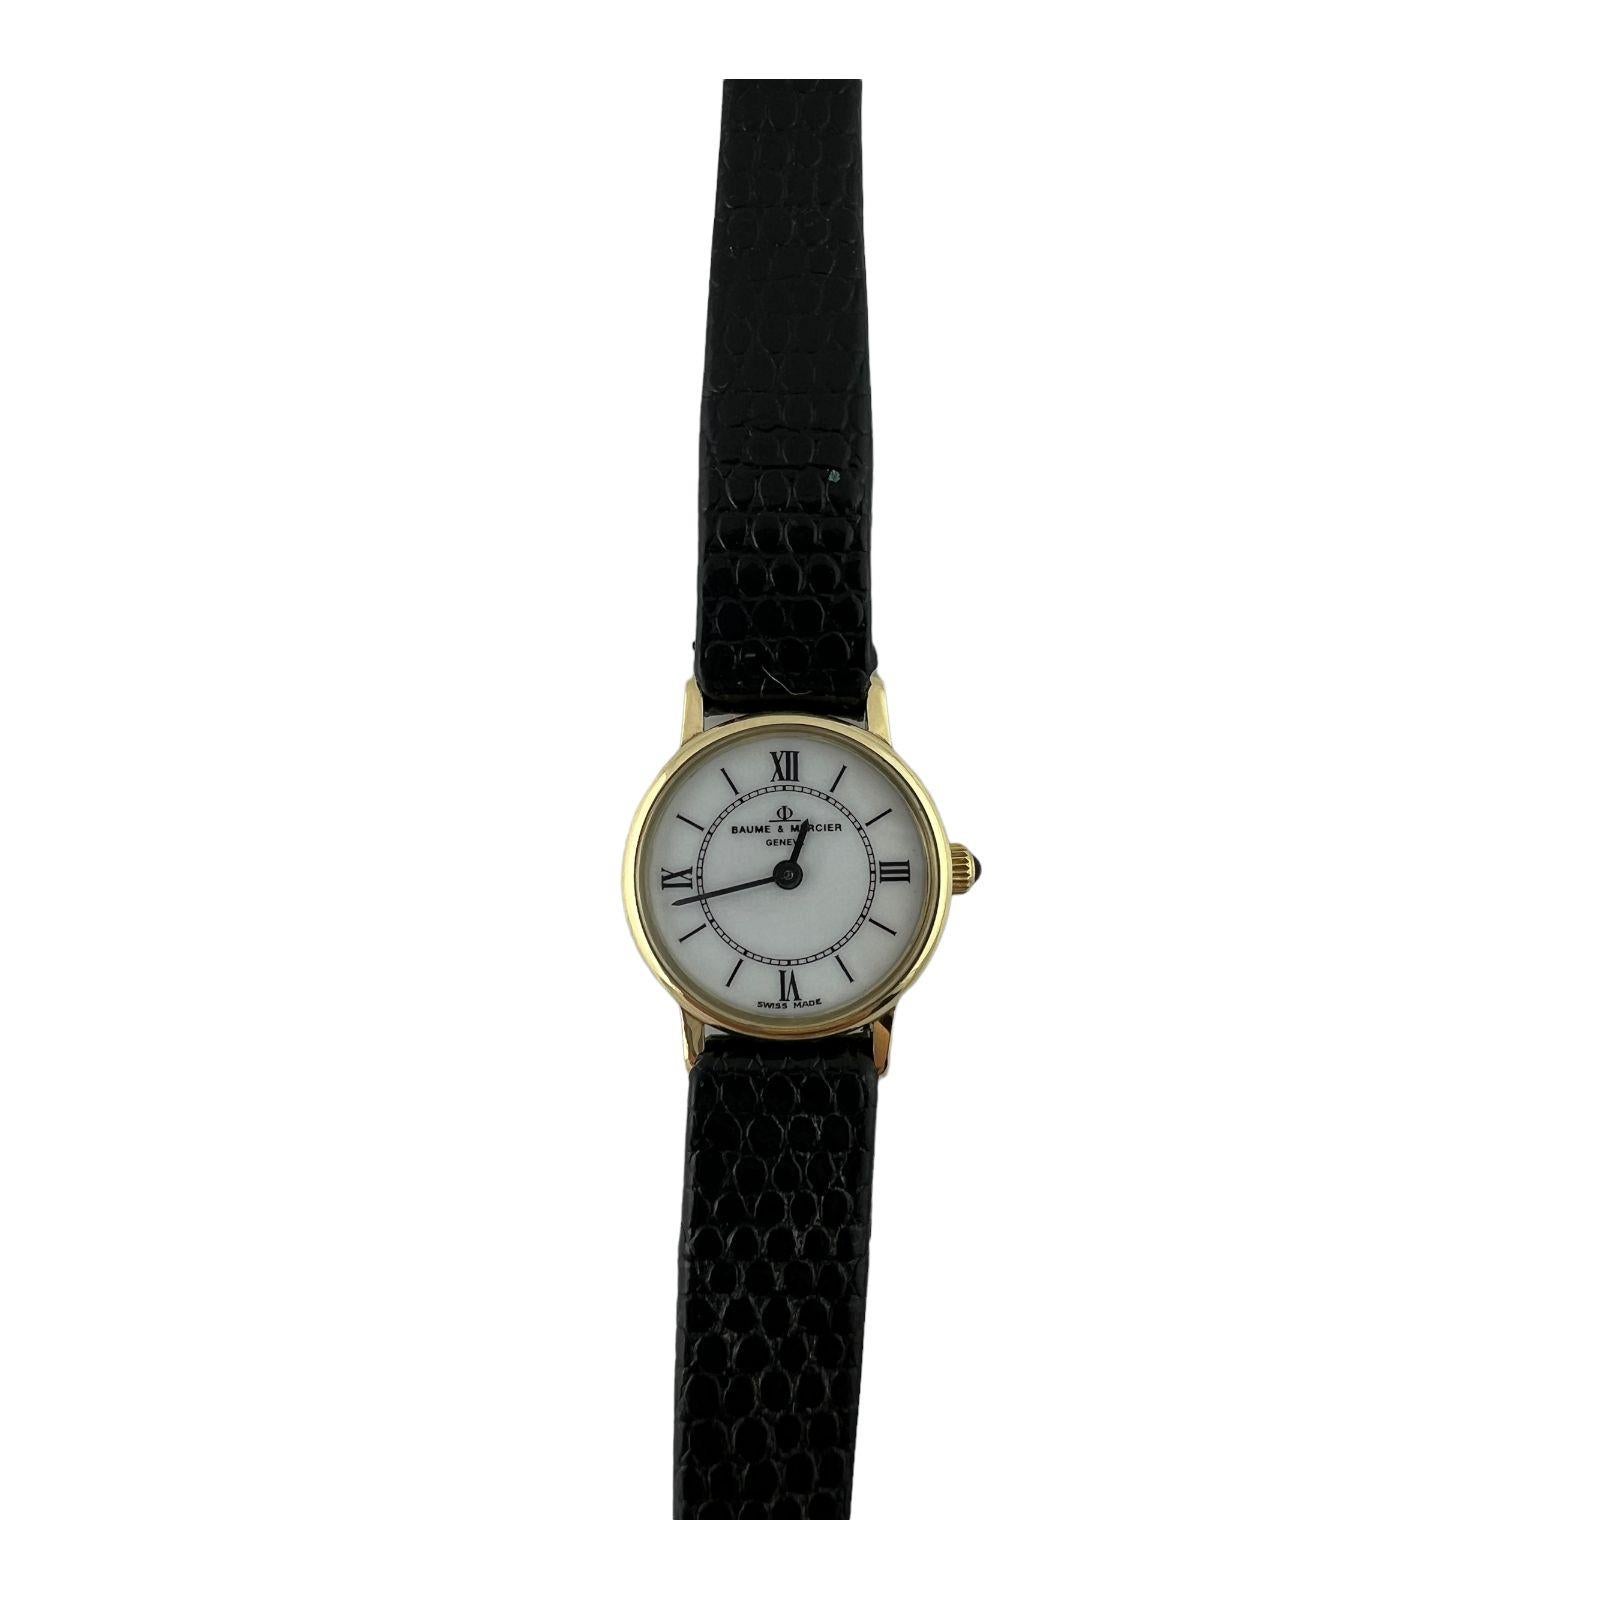 Baume Mercier 14K Yellow Gold Petite Ladies Watch

Quartz movement
 
14K yellow gold case is 18mm in diameter

White Roman and stick dial

Black leather band with gold plated tang buckle - new / not Baume Mercier

approx. 8.25